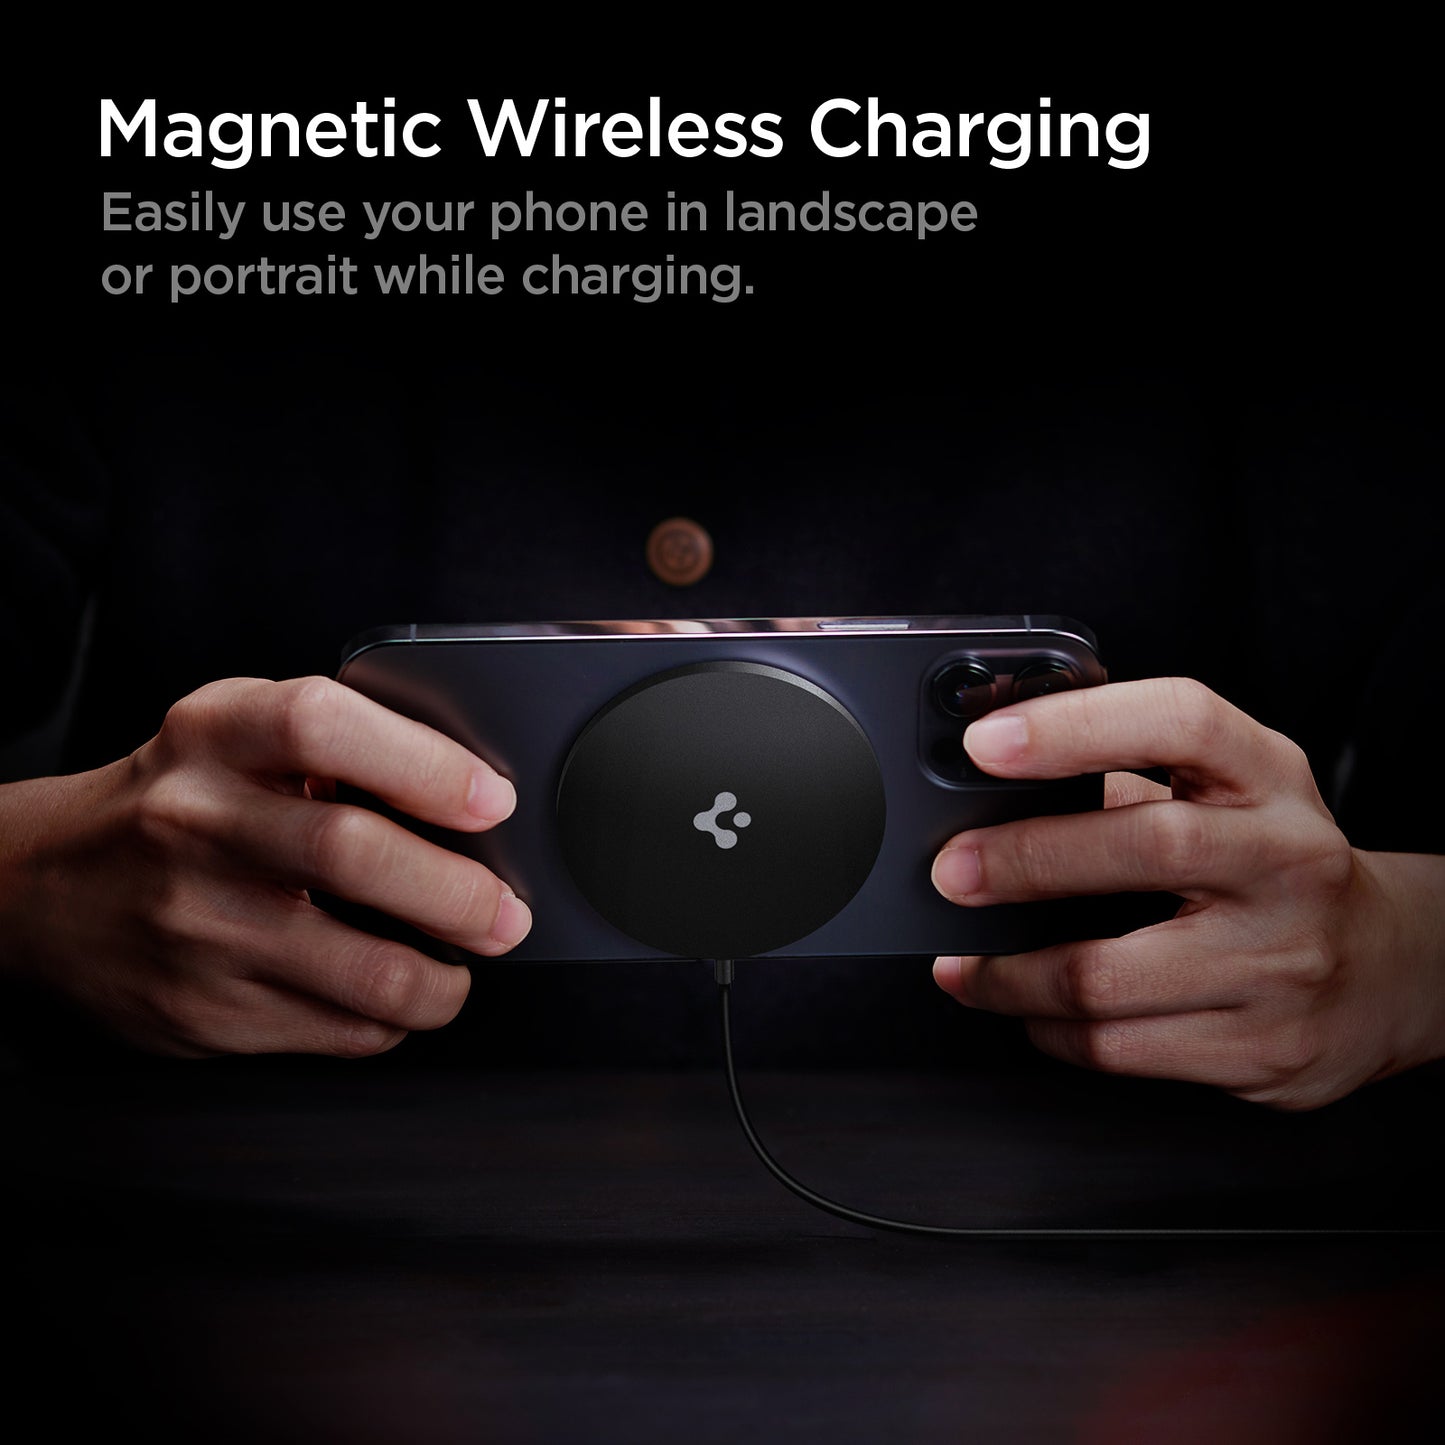 ACH02190 - ArcField™ Magnetic 7.5W Wireless Charger PF2009 (MagFit) in Black showing the Magnetic Wireless Charging. Easily use your phone in landscape or portrait while charging. A man holding a device while attached to a wireless charger